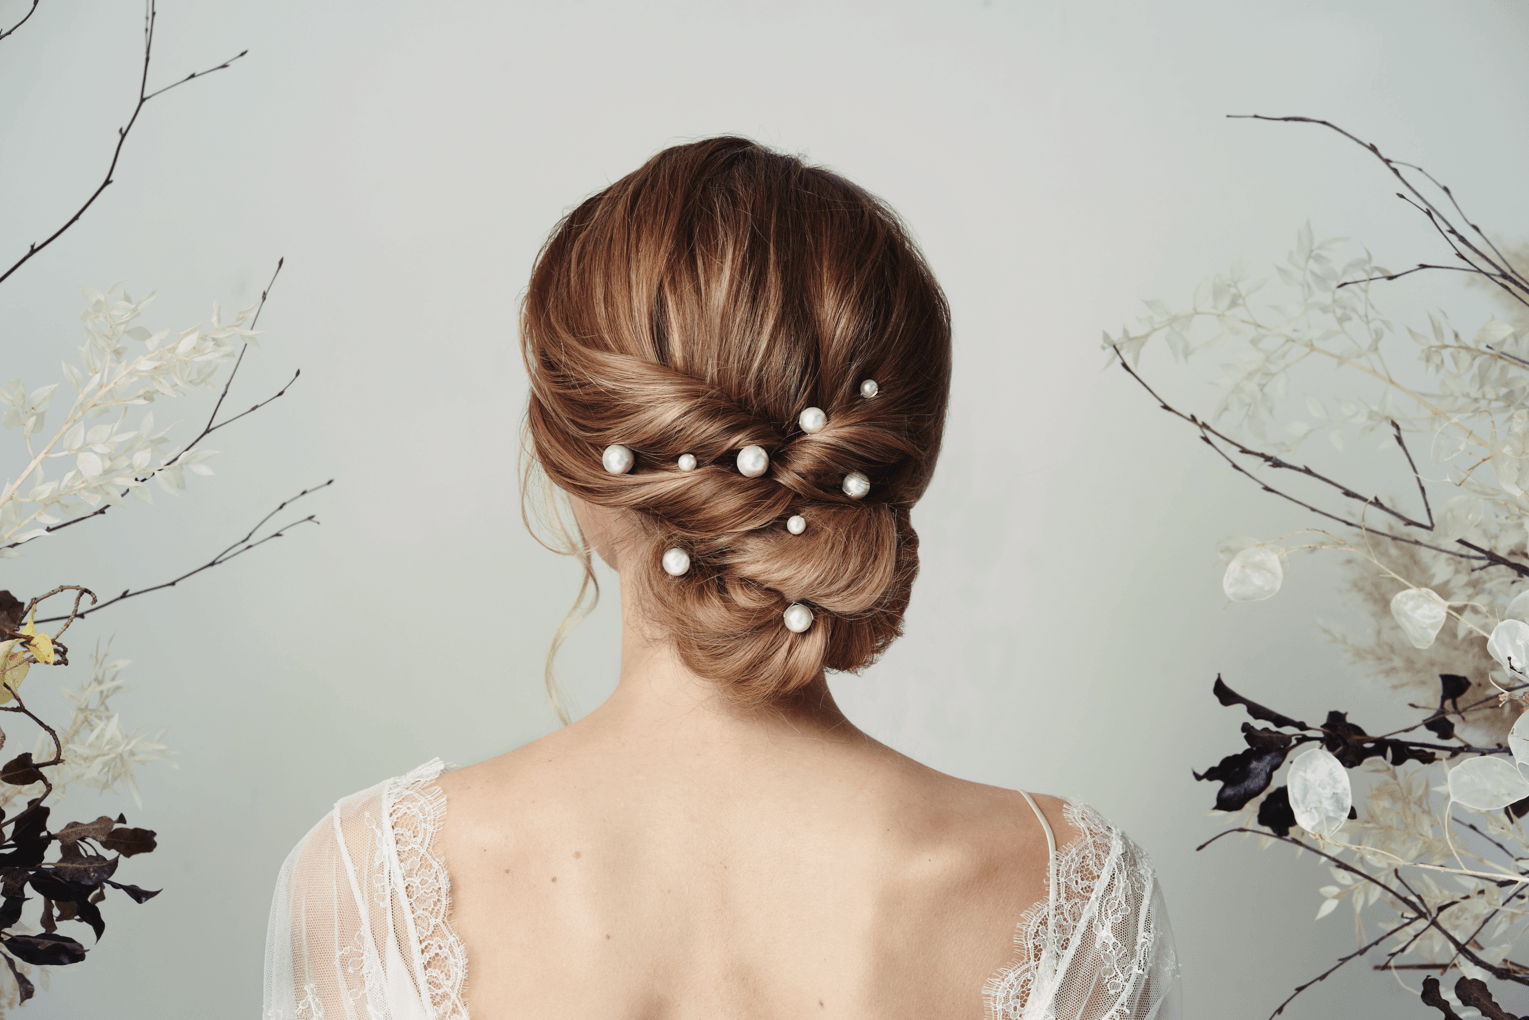 Half up hairstyle with floral hair pins- 2018 wedding hair trends - TANIA  MARAS | bridal headpieces + wedding veils